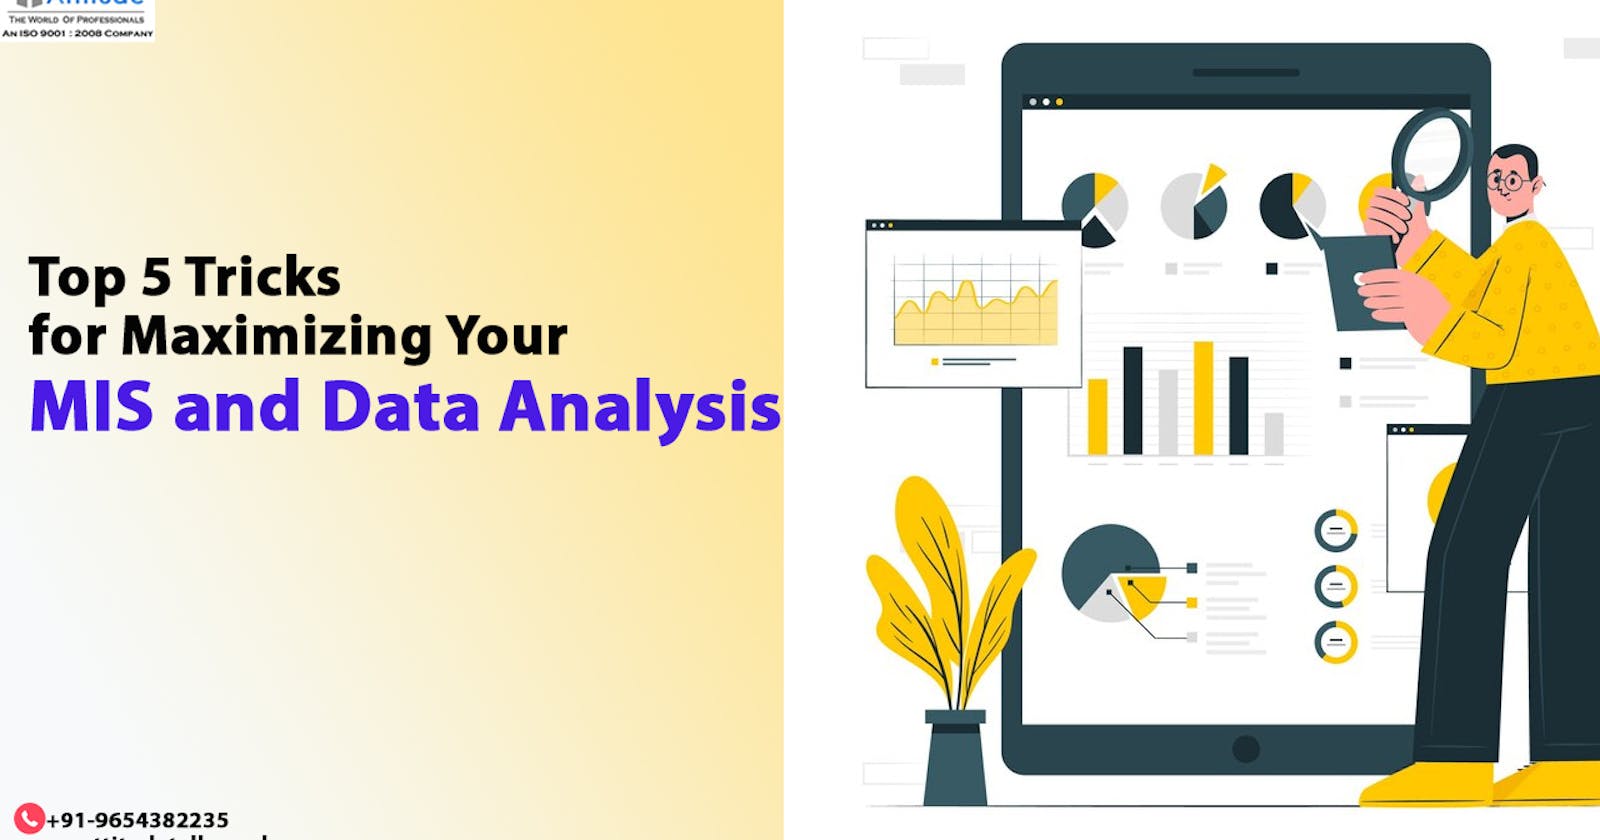 Top 5 Tricks for Maximizing Your MIS and Data Analysis